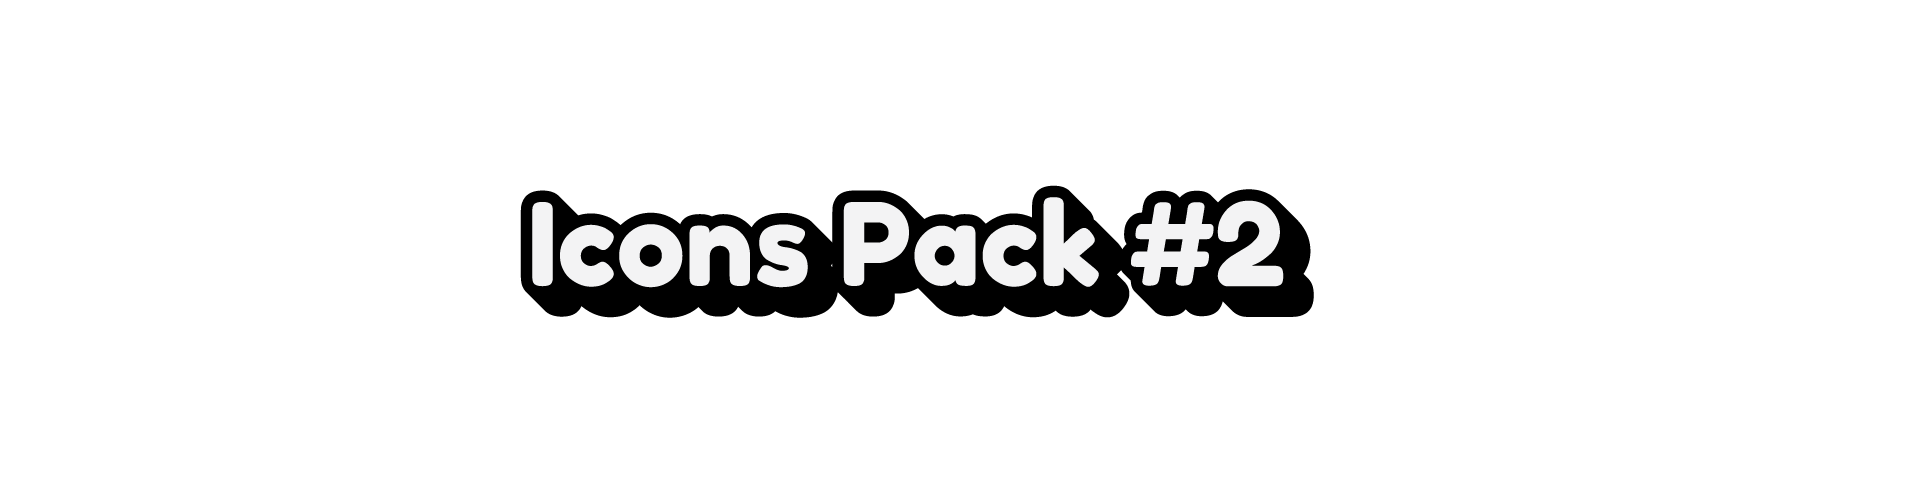 Icons Pack #2